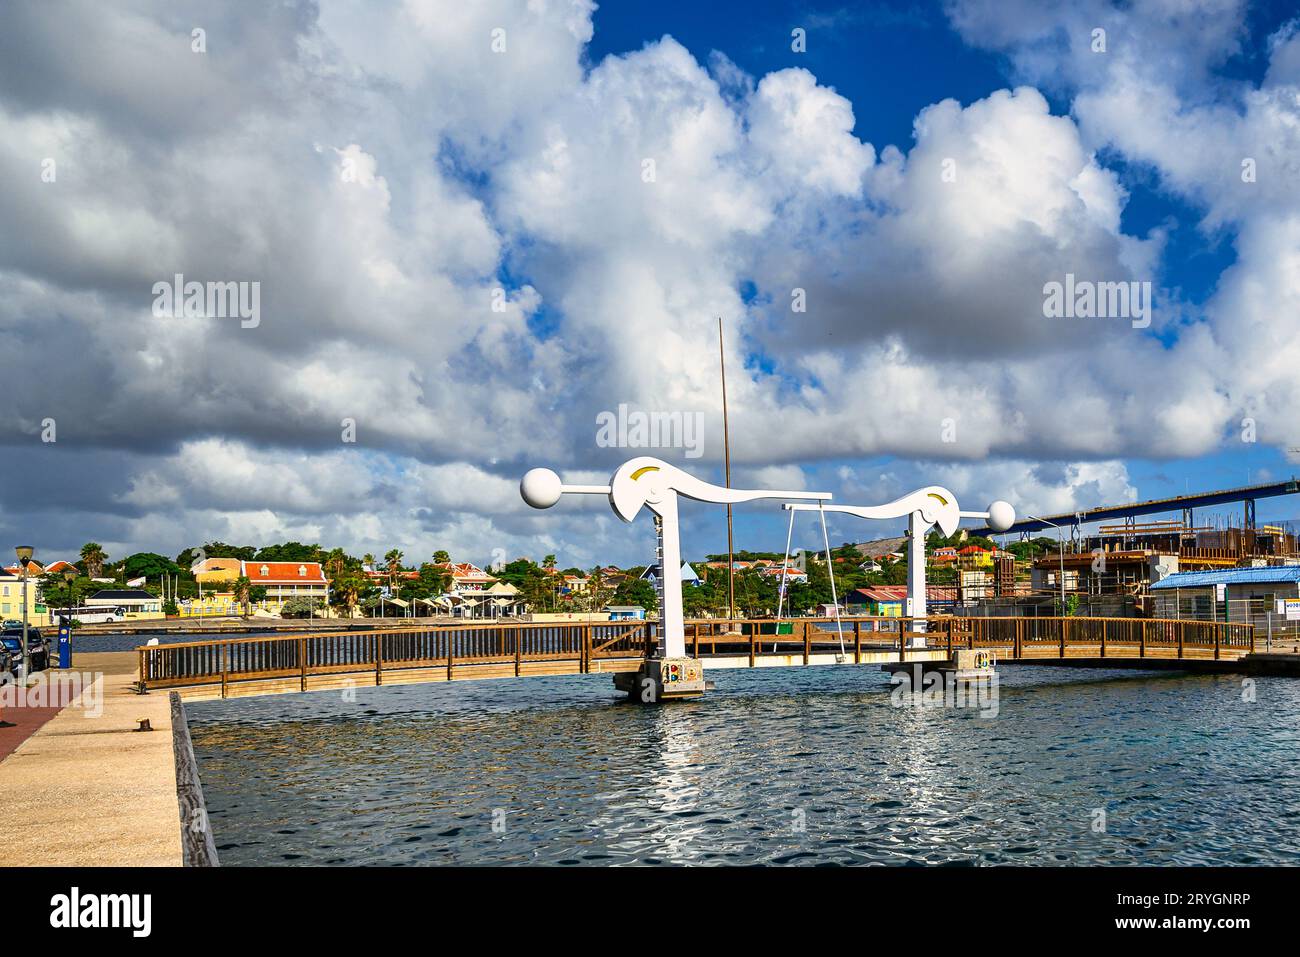 A view of a bridge in Willemstad on Curacao Stock Photo